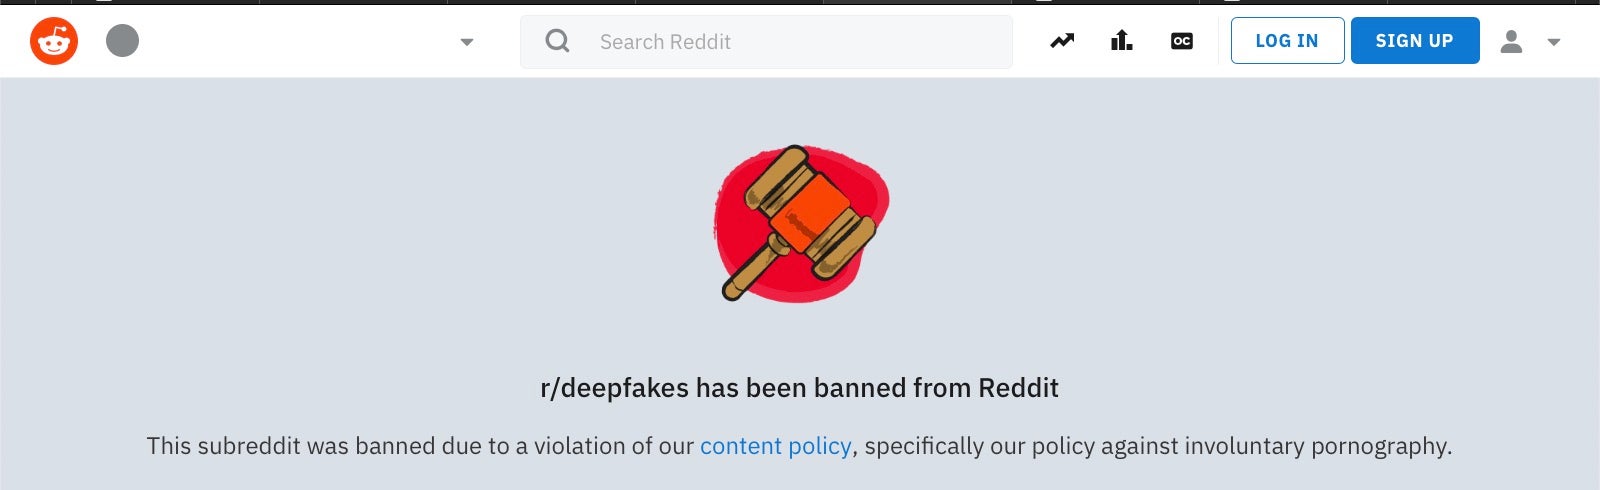 image of deepfakes banned from reddit